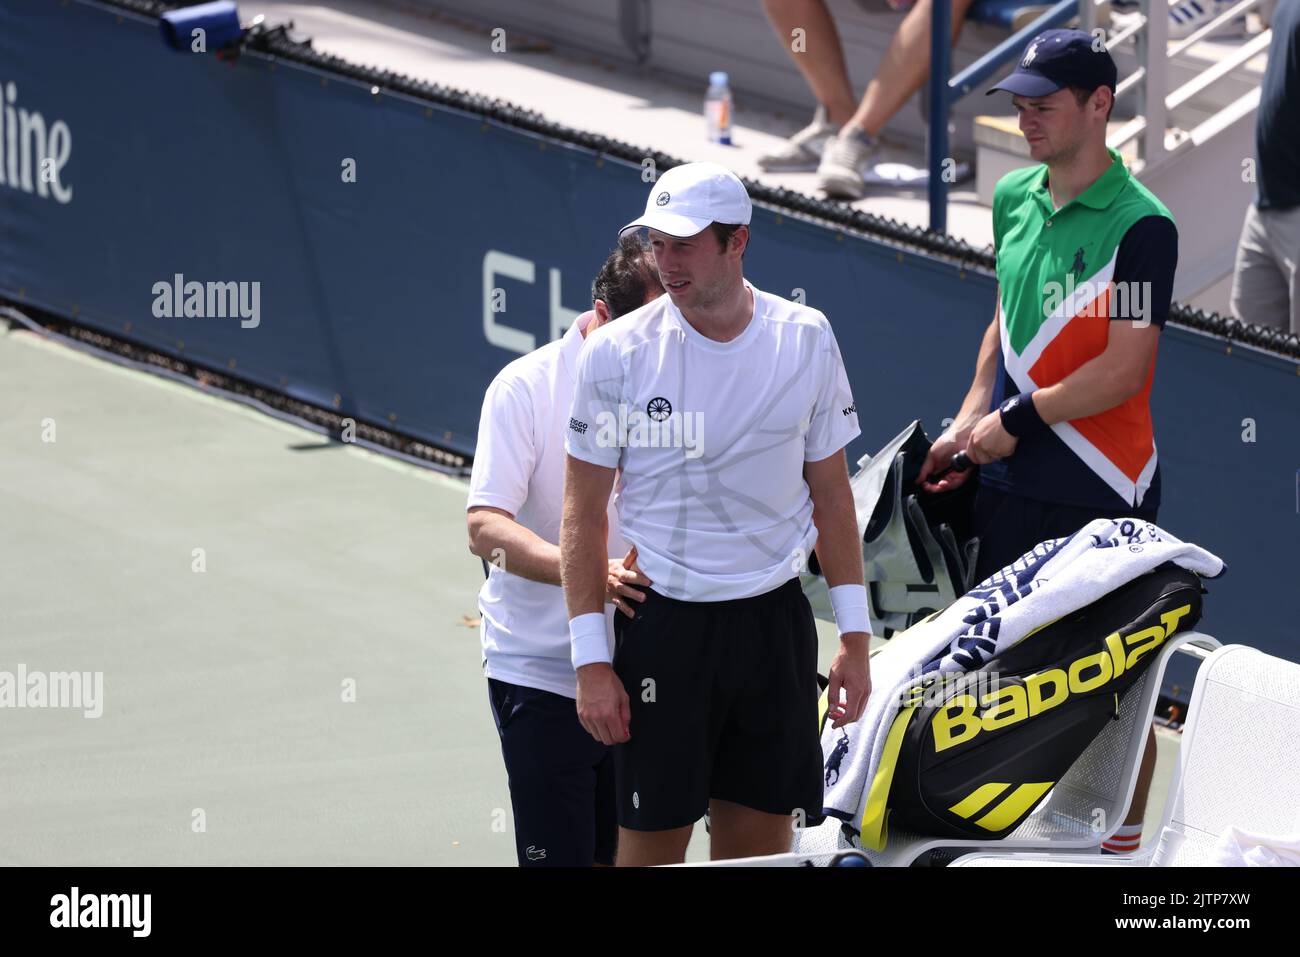 NEW YORK, NY - AUGUST 31: Botic van de Zandschulp of the Netherlands consults with the trainer during his match against Corentin Moutet of France at USTA Billie Jean King National Tennis Center on August 31, 2022 in New York City. (Photo by Adam Stoltman/BSR Agency) Stock Photo